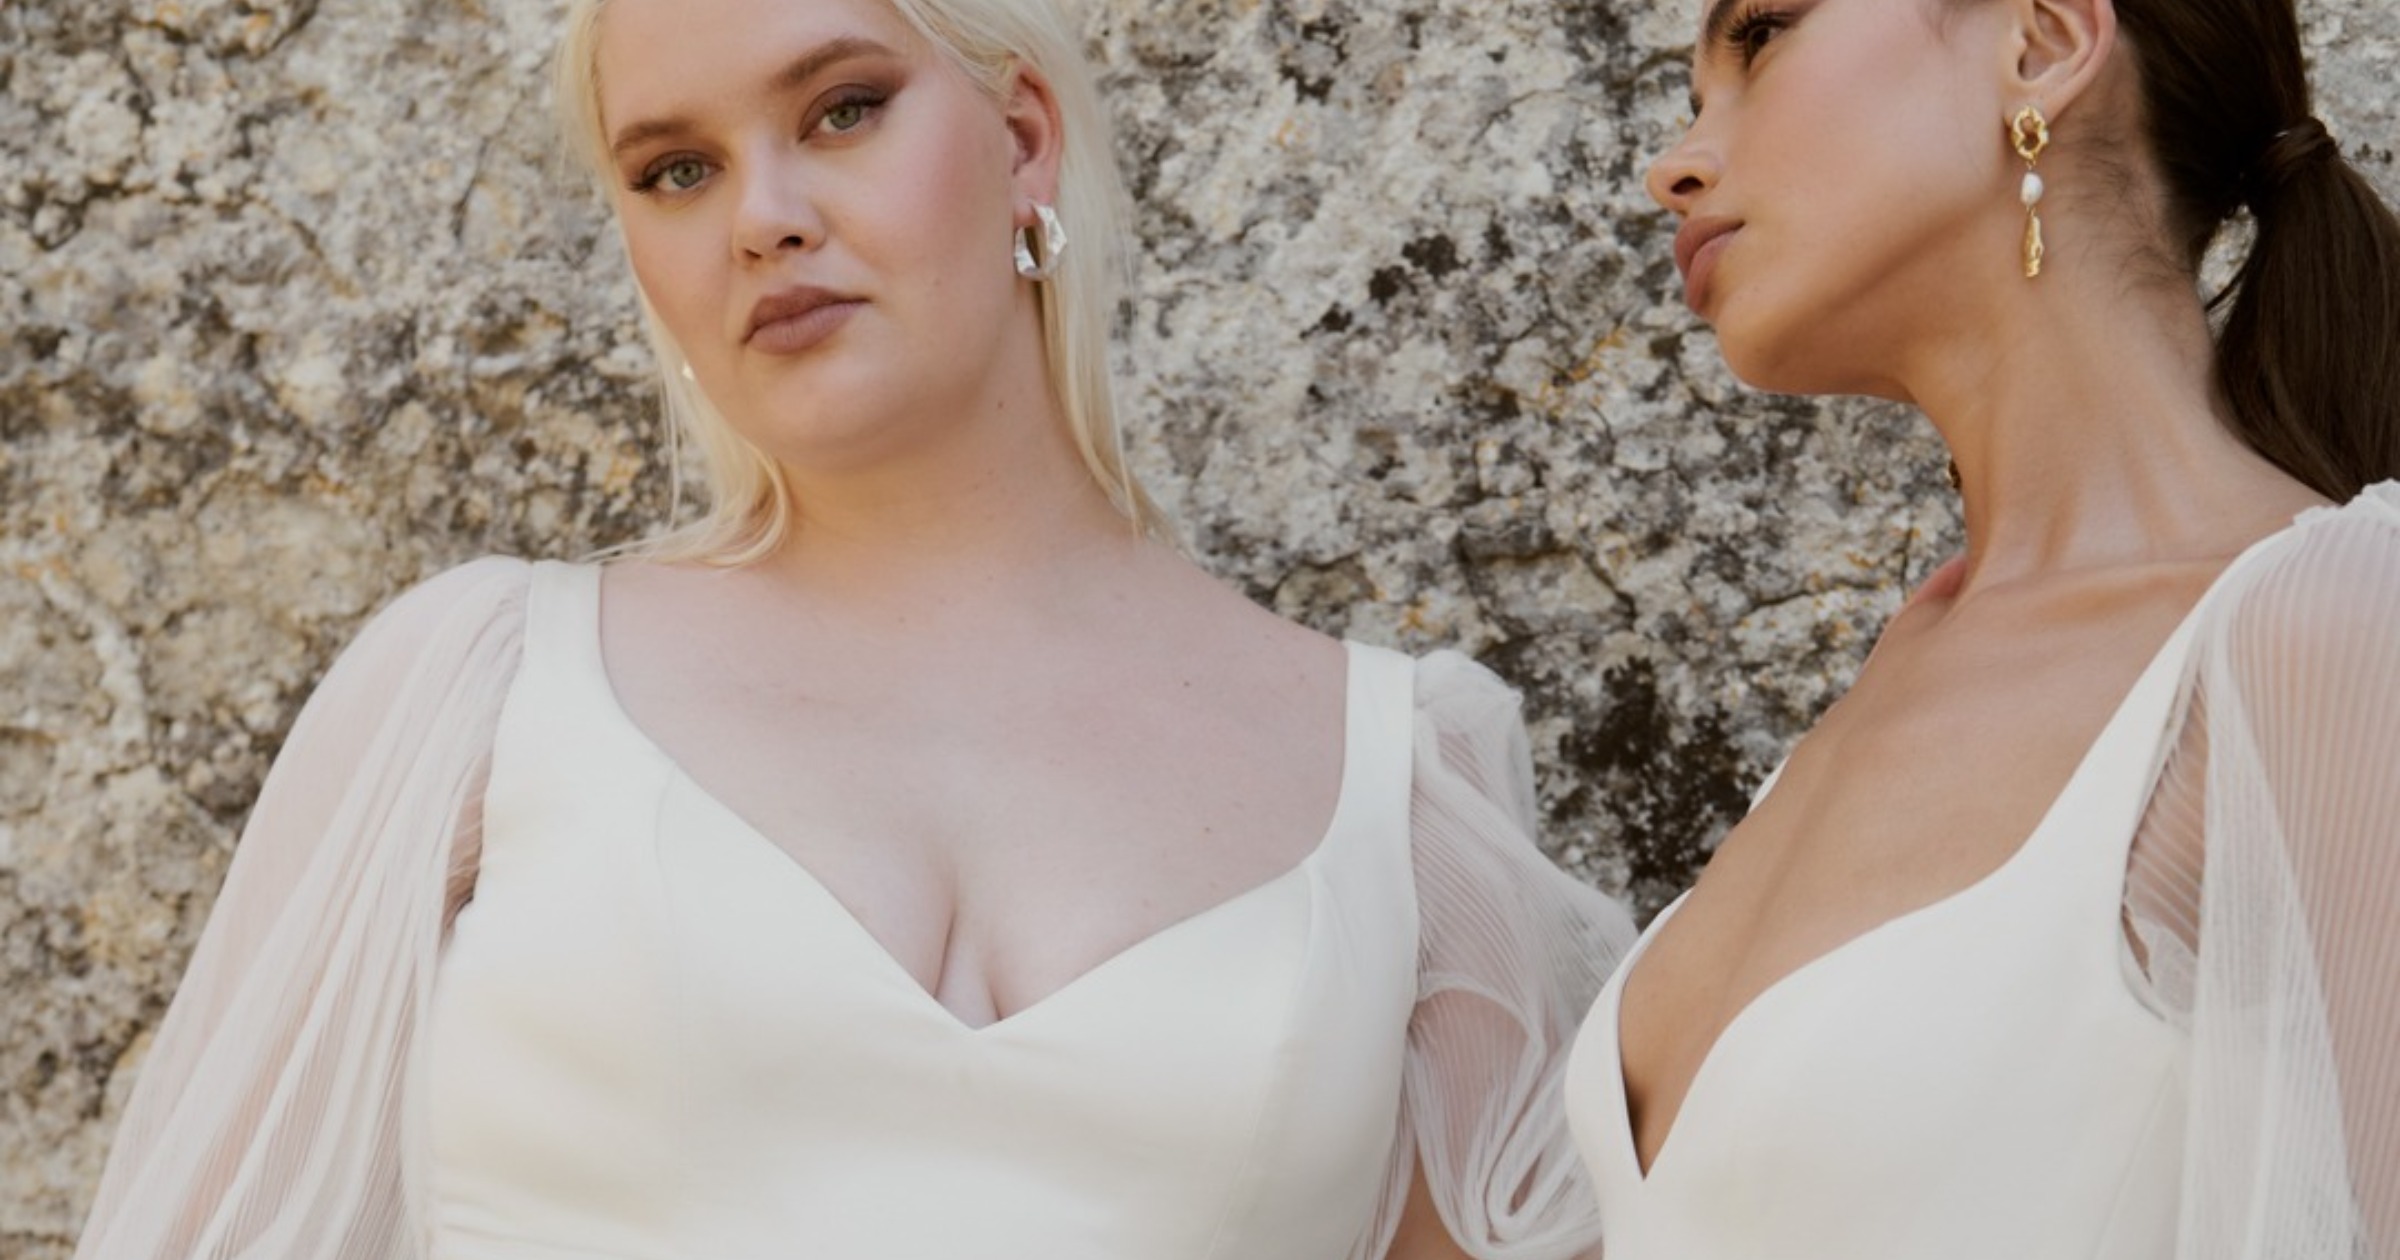 Aesling–The Bridal Brand For EveryBody